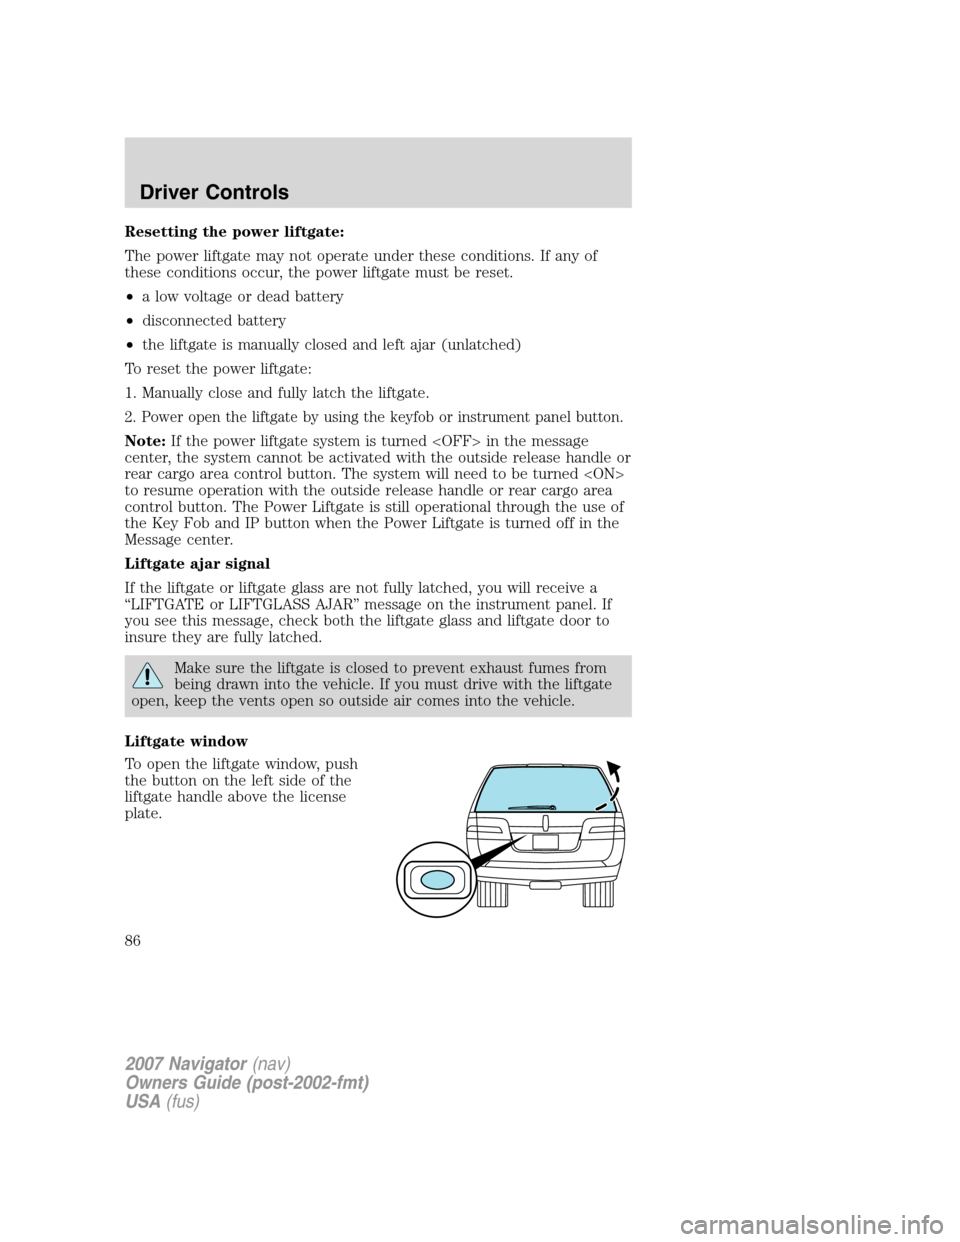 LINCOLN NAVIGATOR 2007 User Guide Resetting the power liftgate:
The power liftgate may not operate under these conditions. If any of
these conditions occur, the power liftgate must be reset.
•a low voltage or dead battery
•disconn